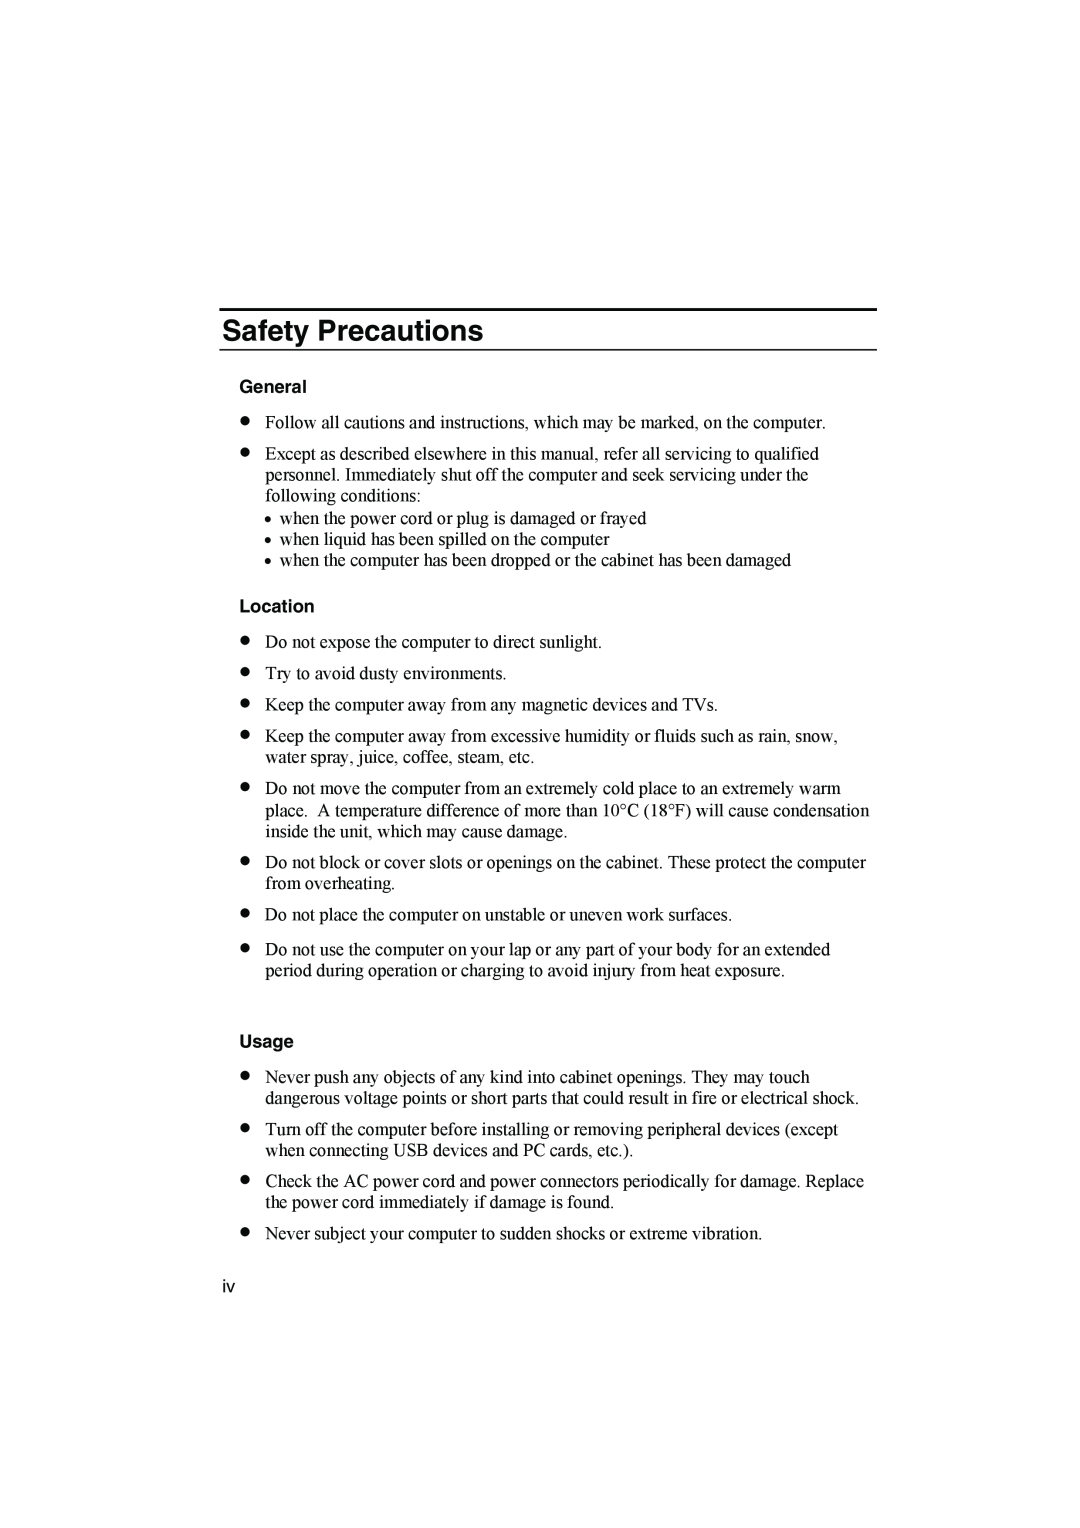 Sharp PC-MM1 manual Safety Precautions, General, Location, Usage 